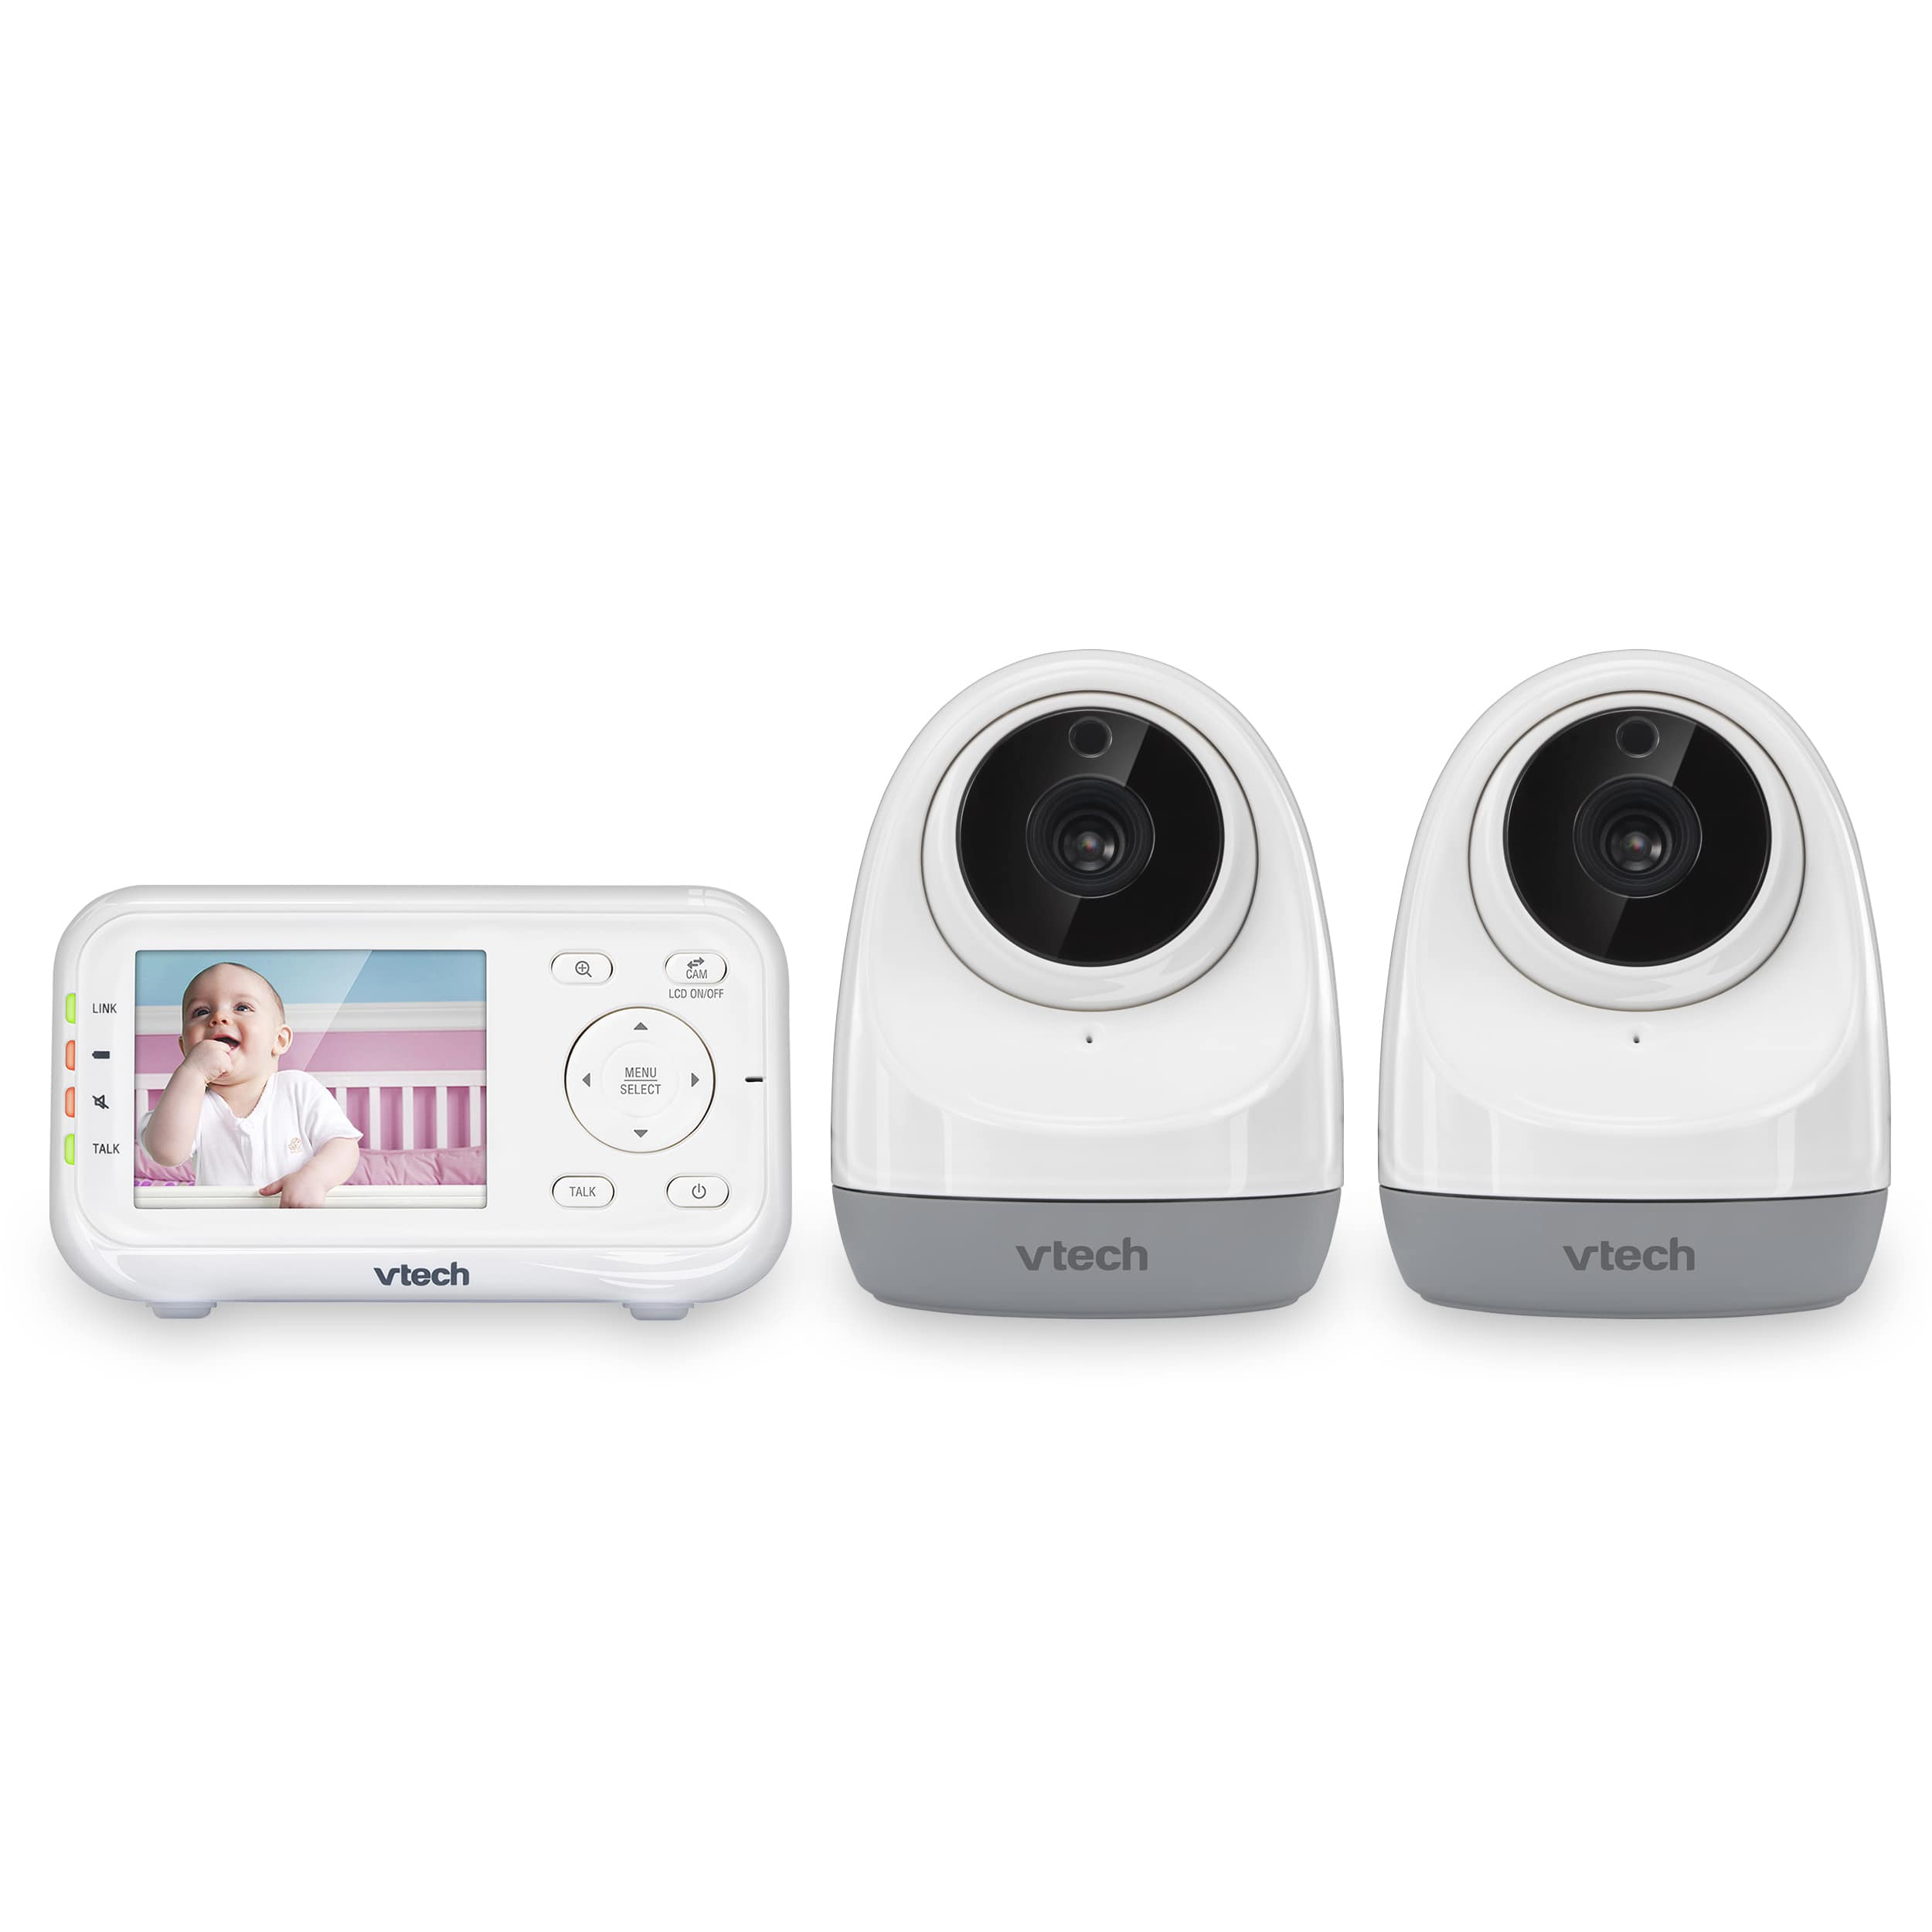 2.8" Digital Video Baby Monitor with 2 Pan & Tilt Cameras, Full-Color and Automatic Night Vision